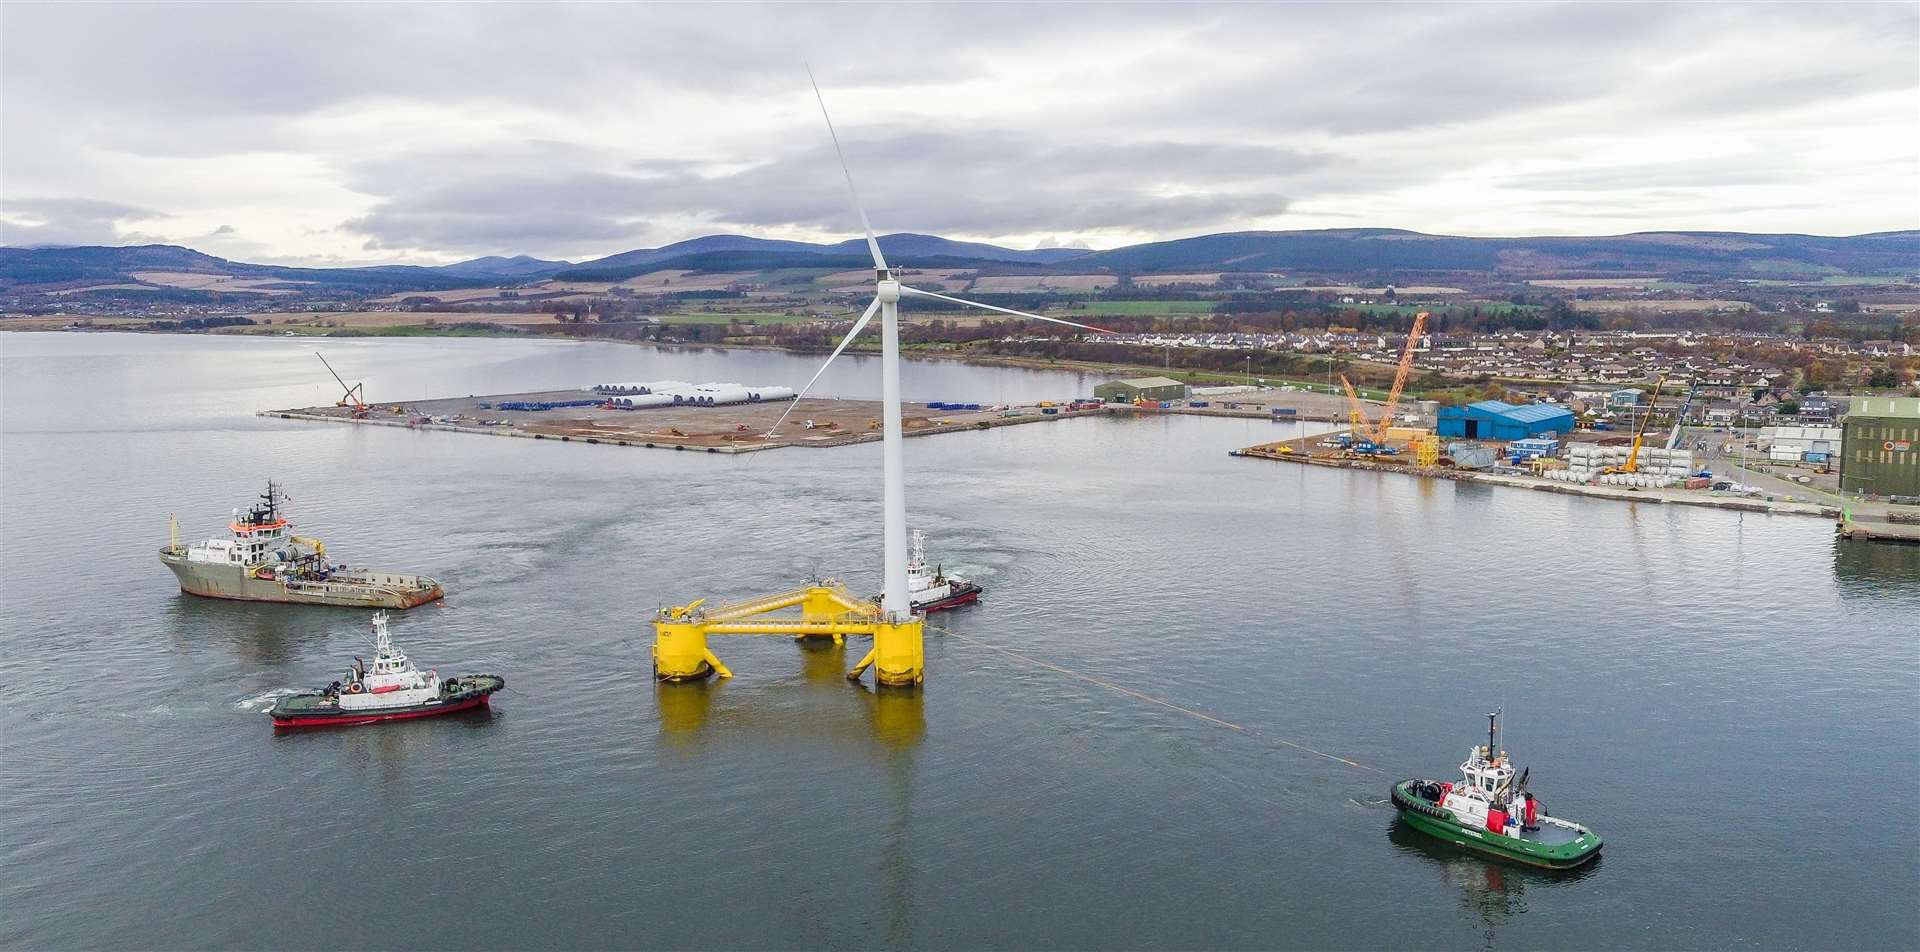 The Cromarty Firth could spearhead new wind power developments. Picture: Malcolm McCurrach